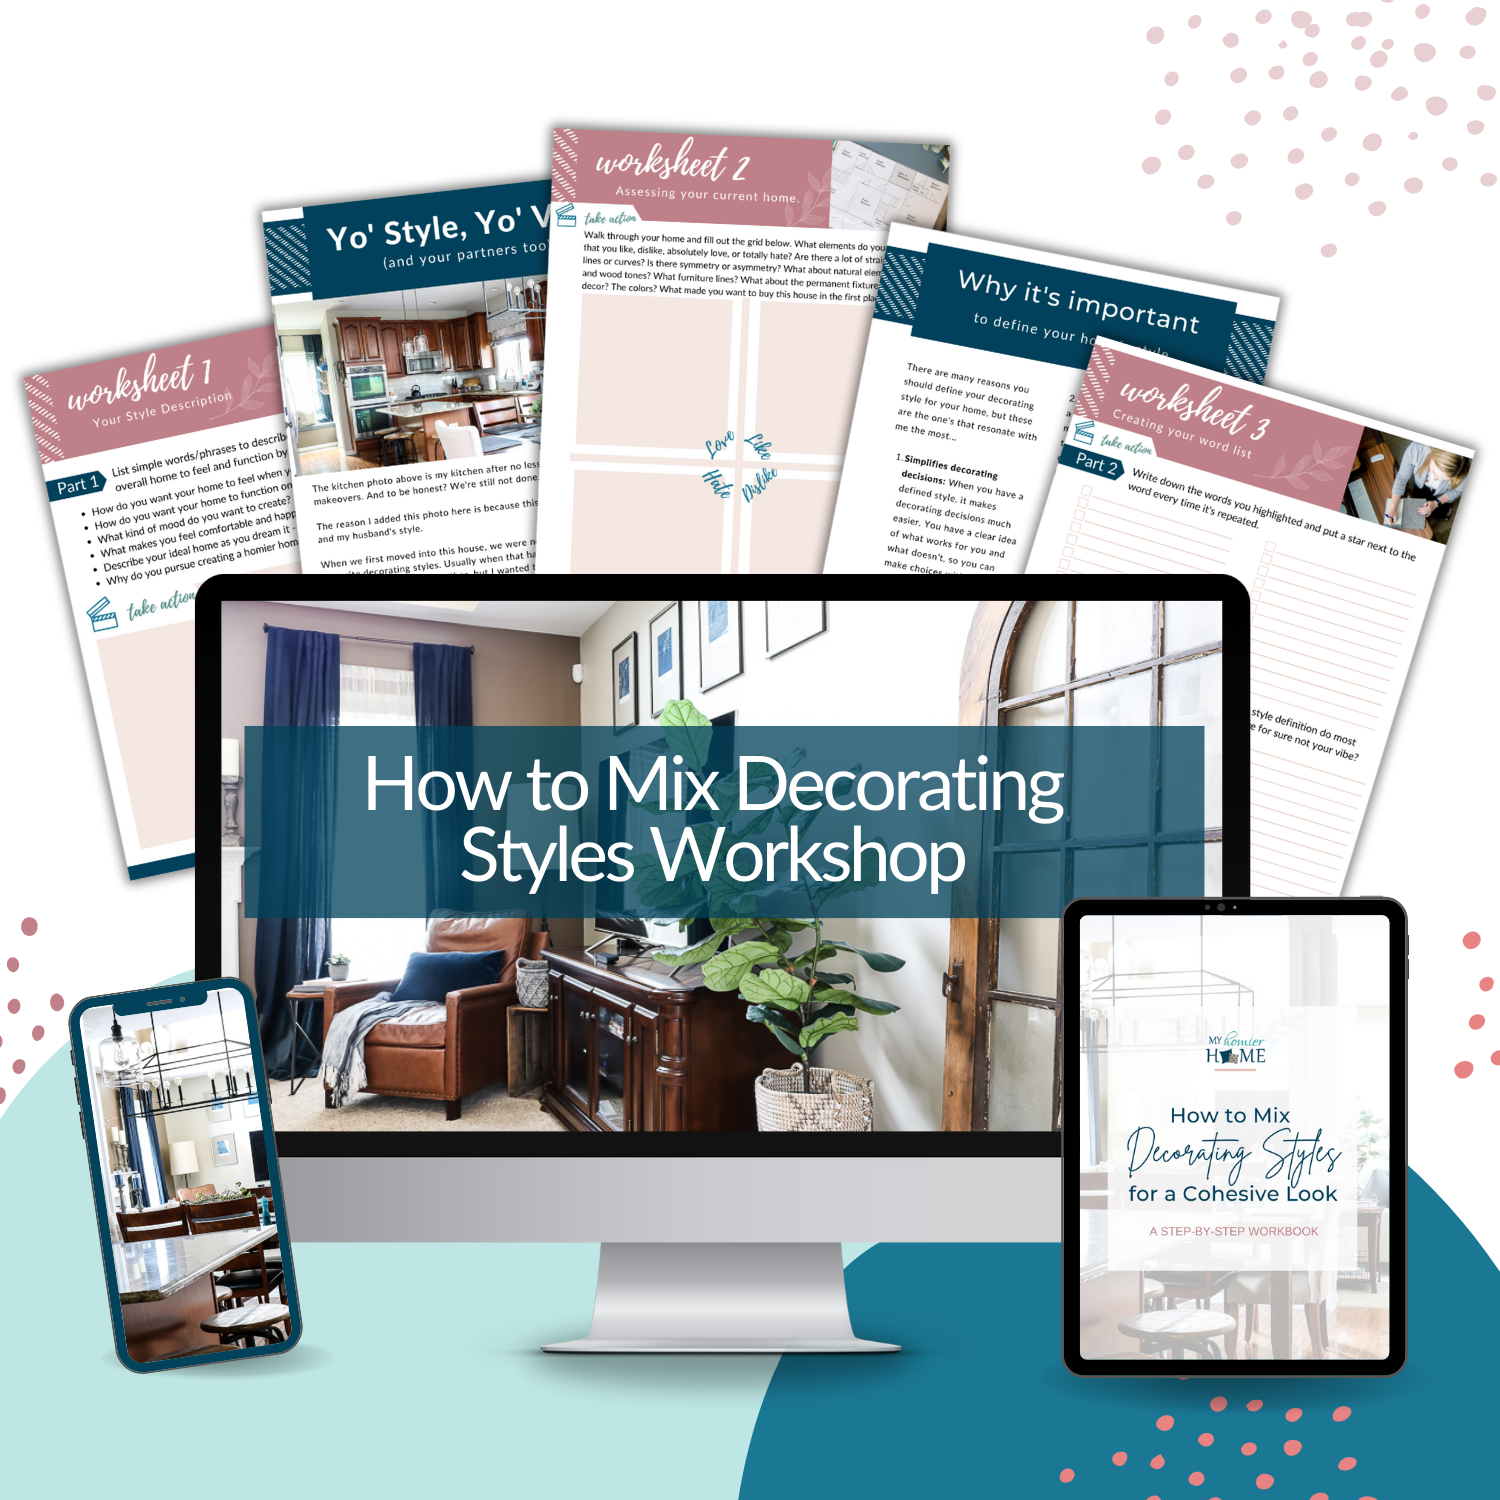 Join us for an engaging workshop on how to make savvy decorating decisions by combining different styles. Discover how to create a cohesive and personalized style profile through expert guidance at the Create Your Style Profile Workshop Bundle hosted by My Homier Home. Don&